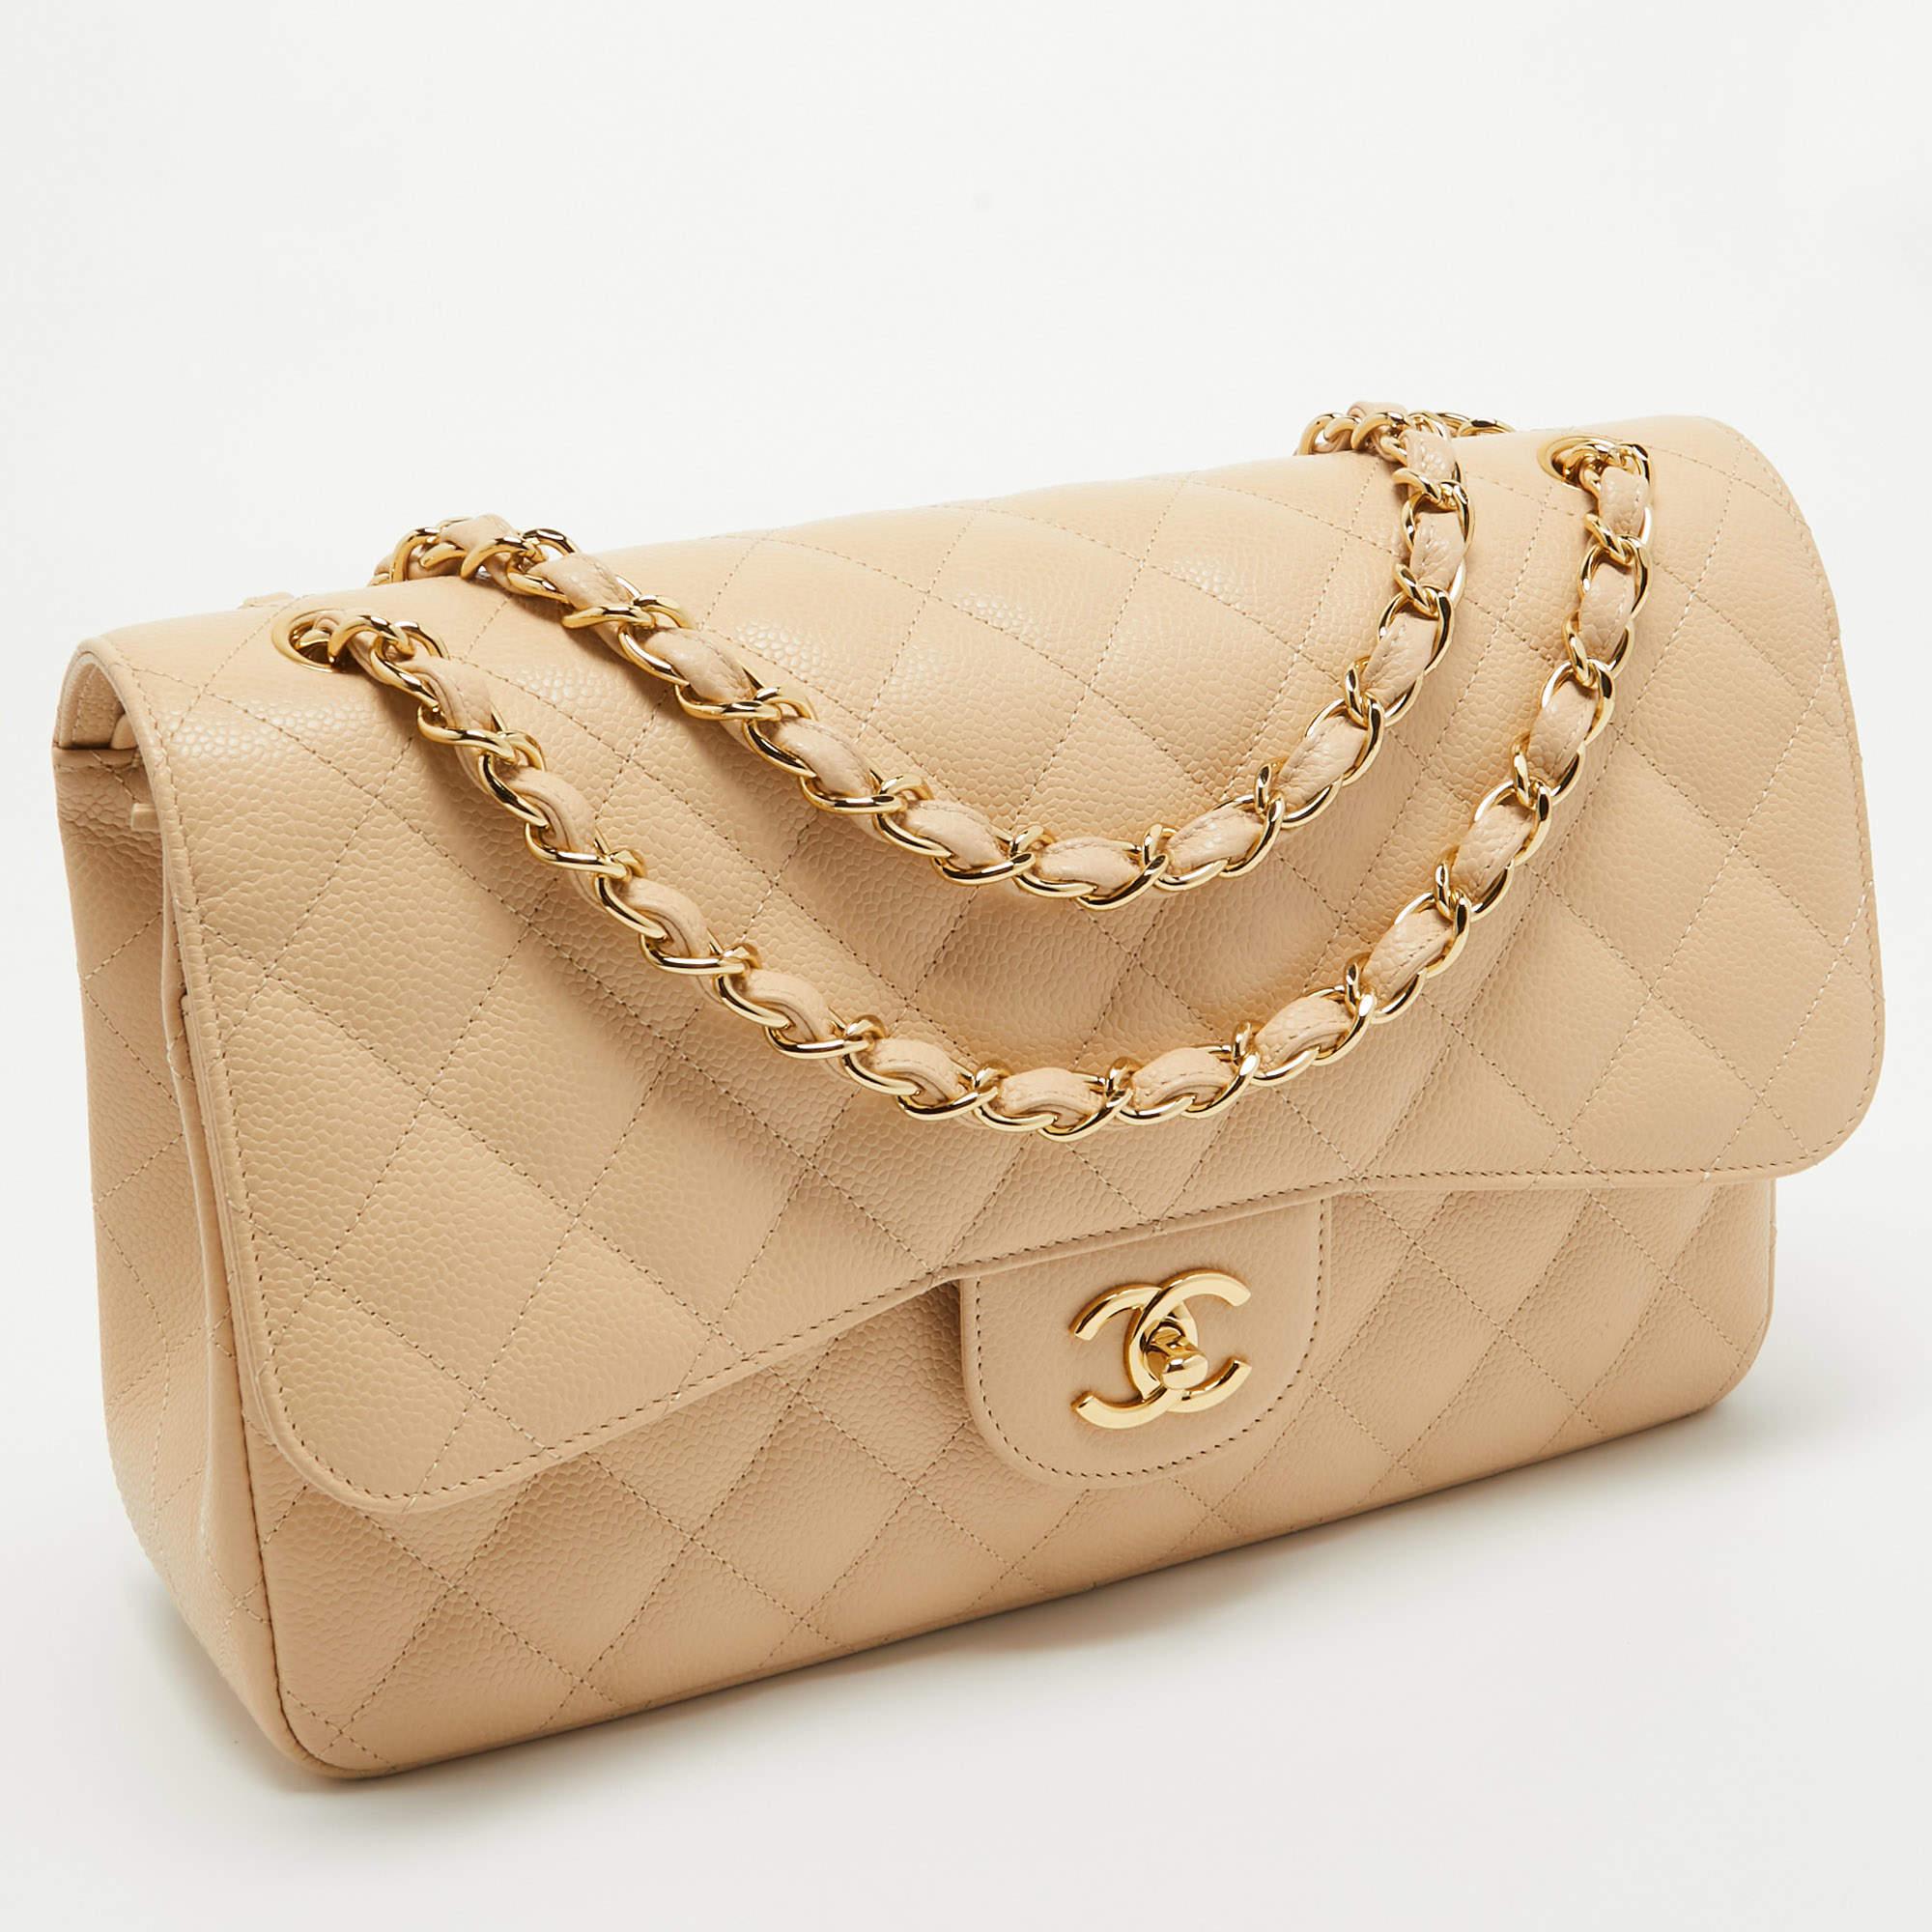 Chanel's luxurious Classic Flap bag is a must-have in a well-curated wardrobe! This stunning bag has a masterfully crafted leather exterior with gold-tone hardware and the iconic CC logo on the front. This Classic Jumbo Classic Double Flap is